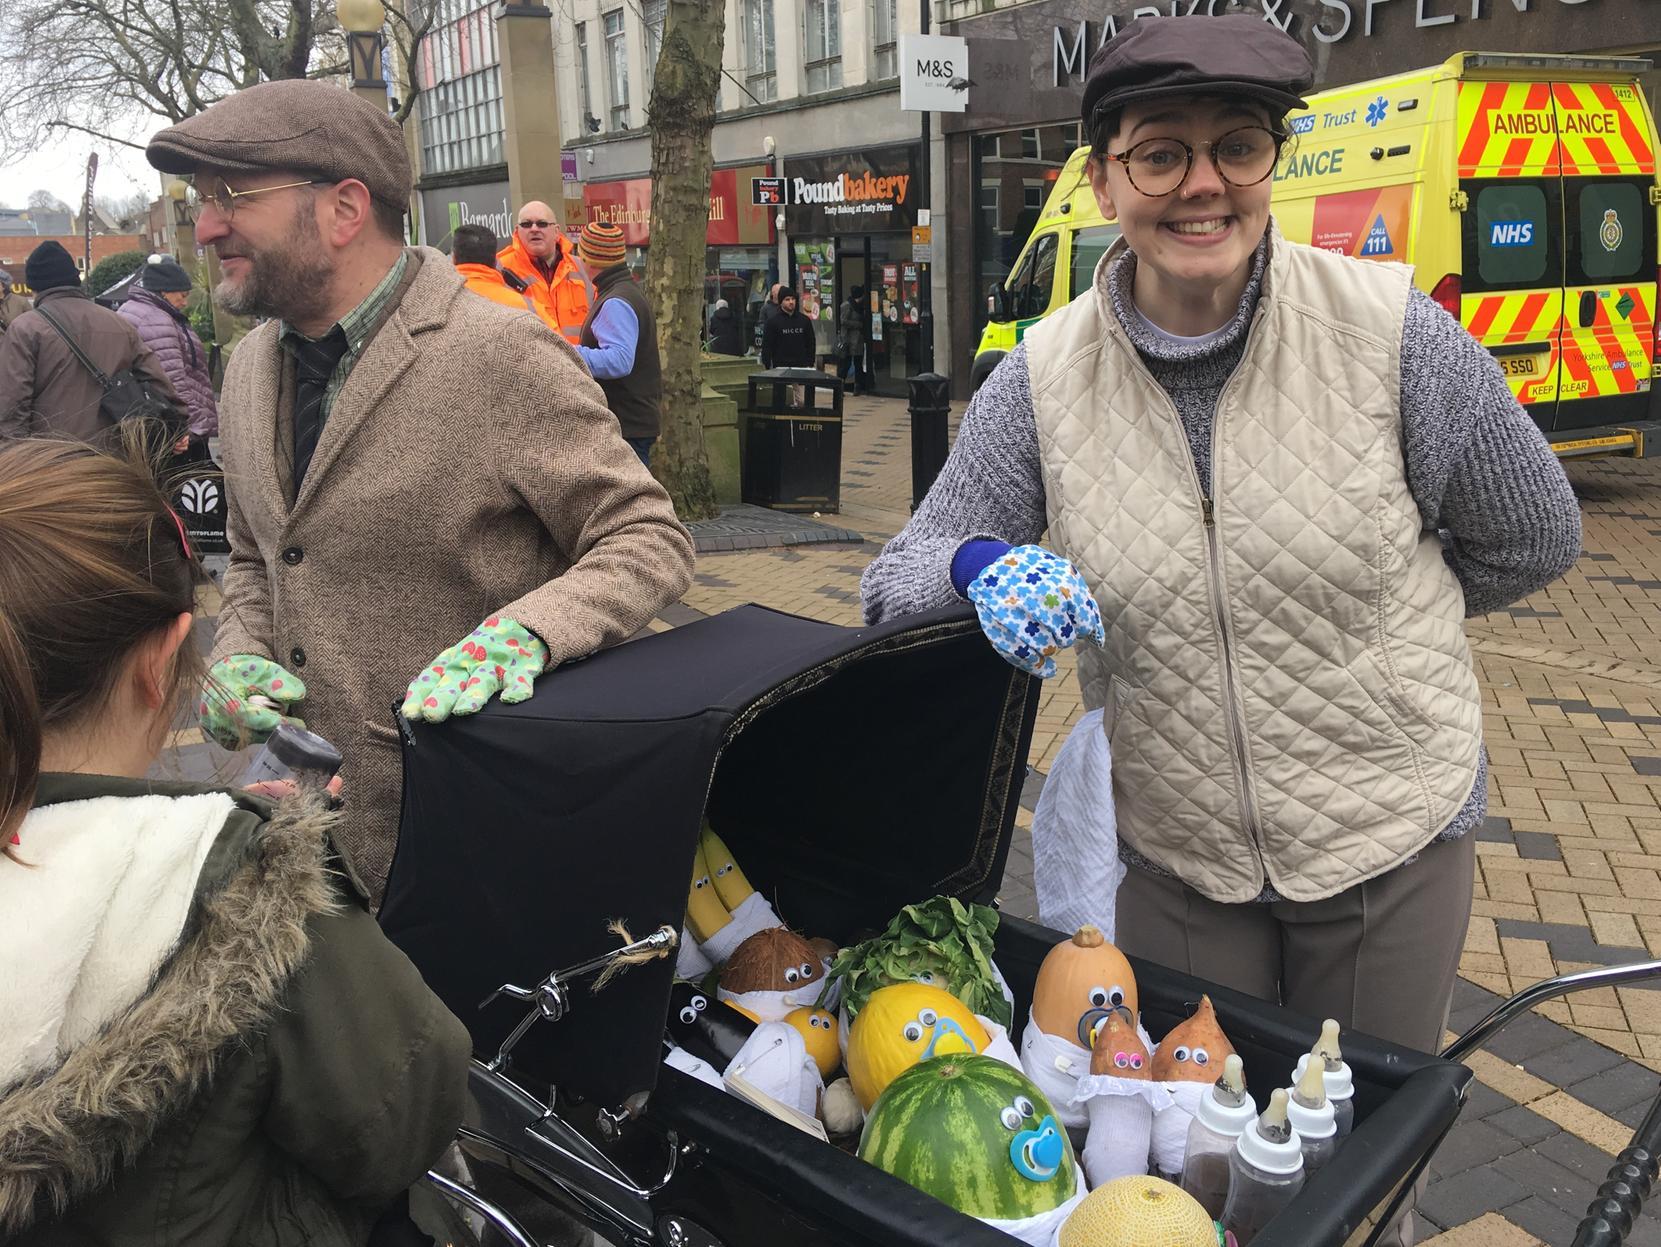 This pair of gardener's brought their veggie babies out to greet the public